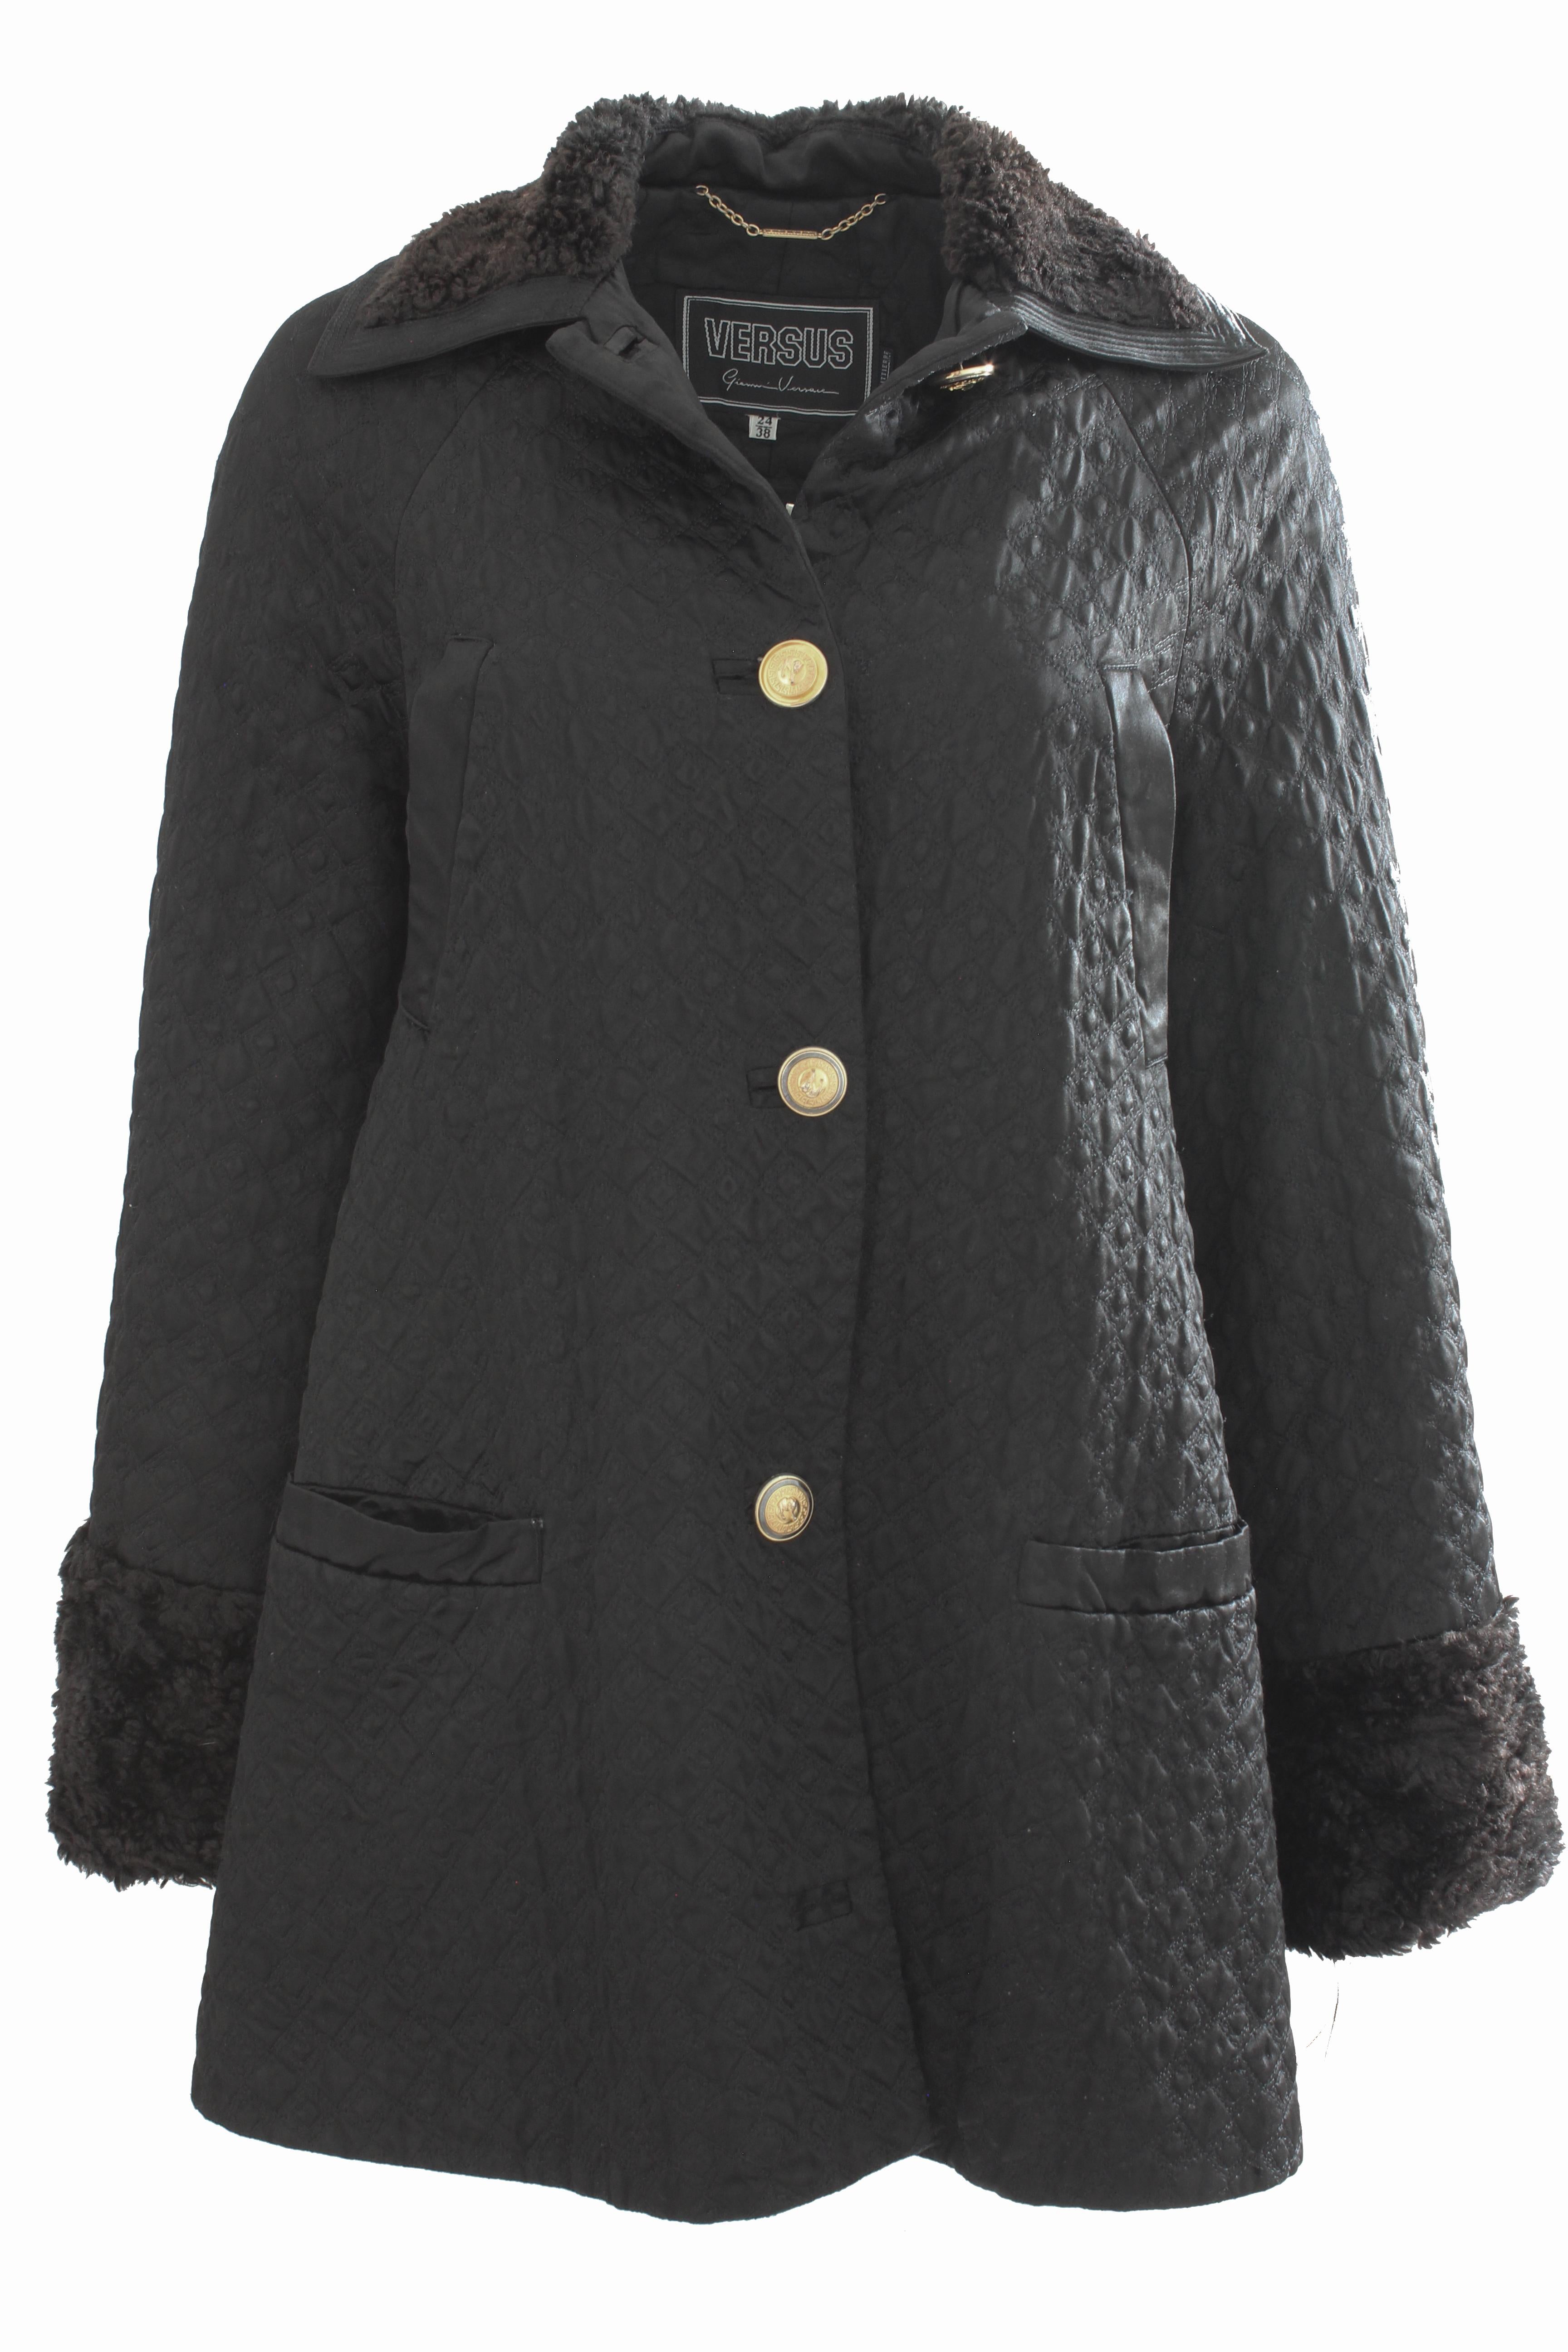 Gianni Versace Jacket or Swing Coat Diamond Quilted Black Satin with Fur Trim 38 3